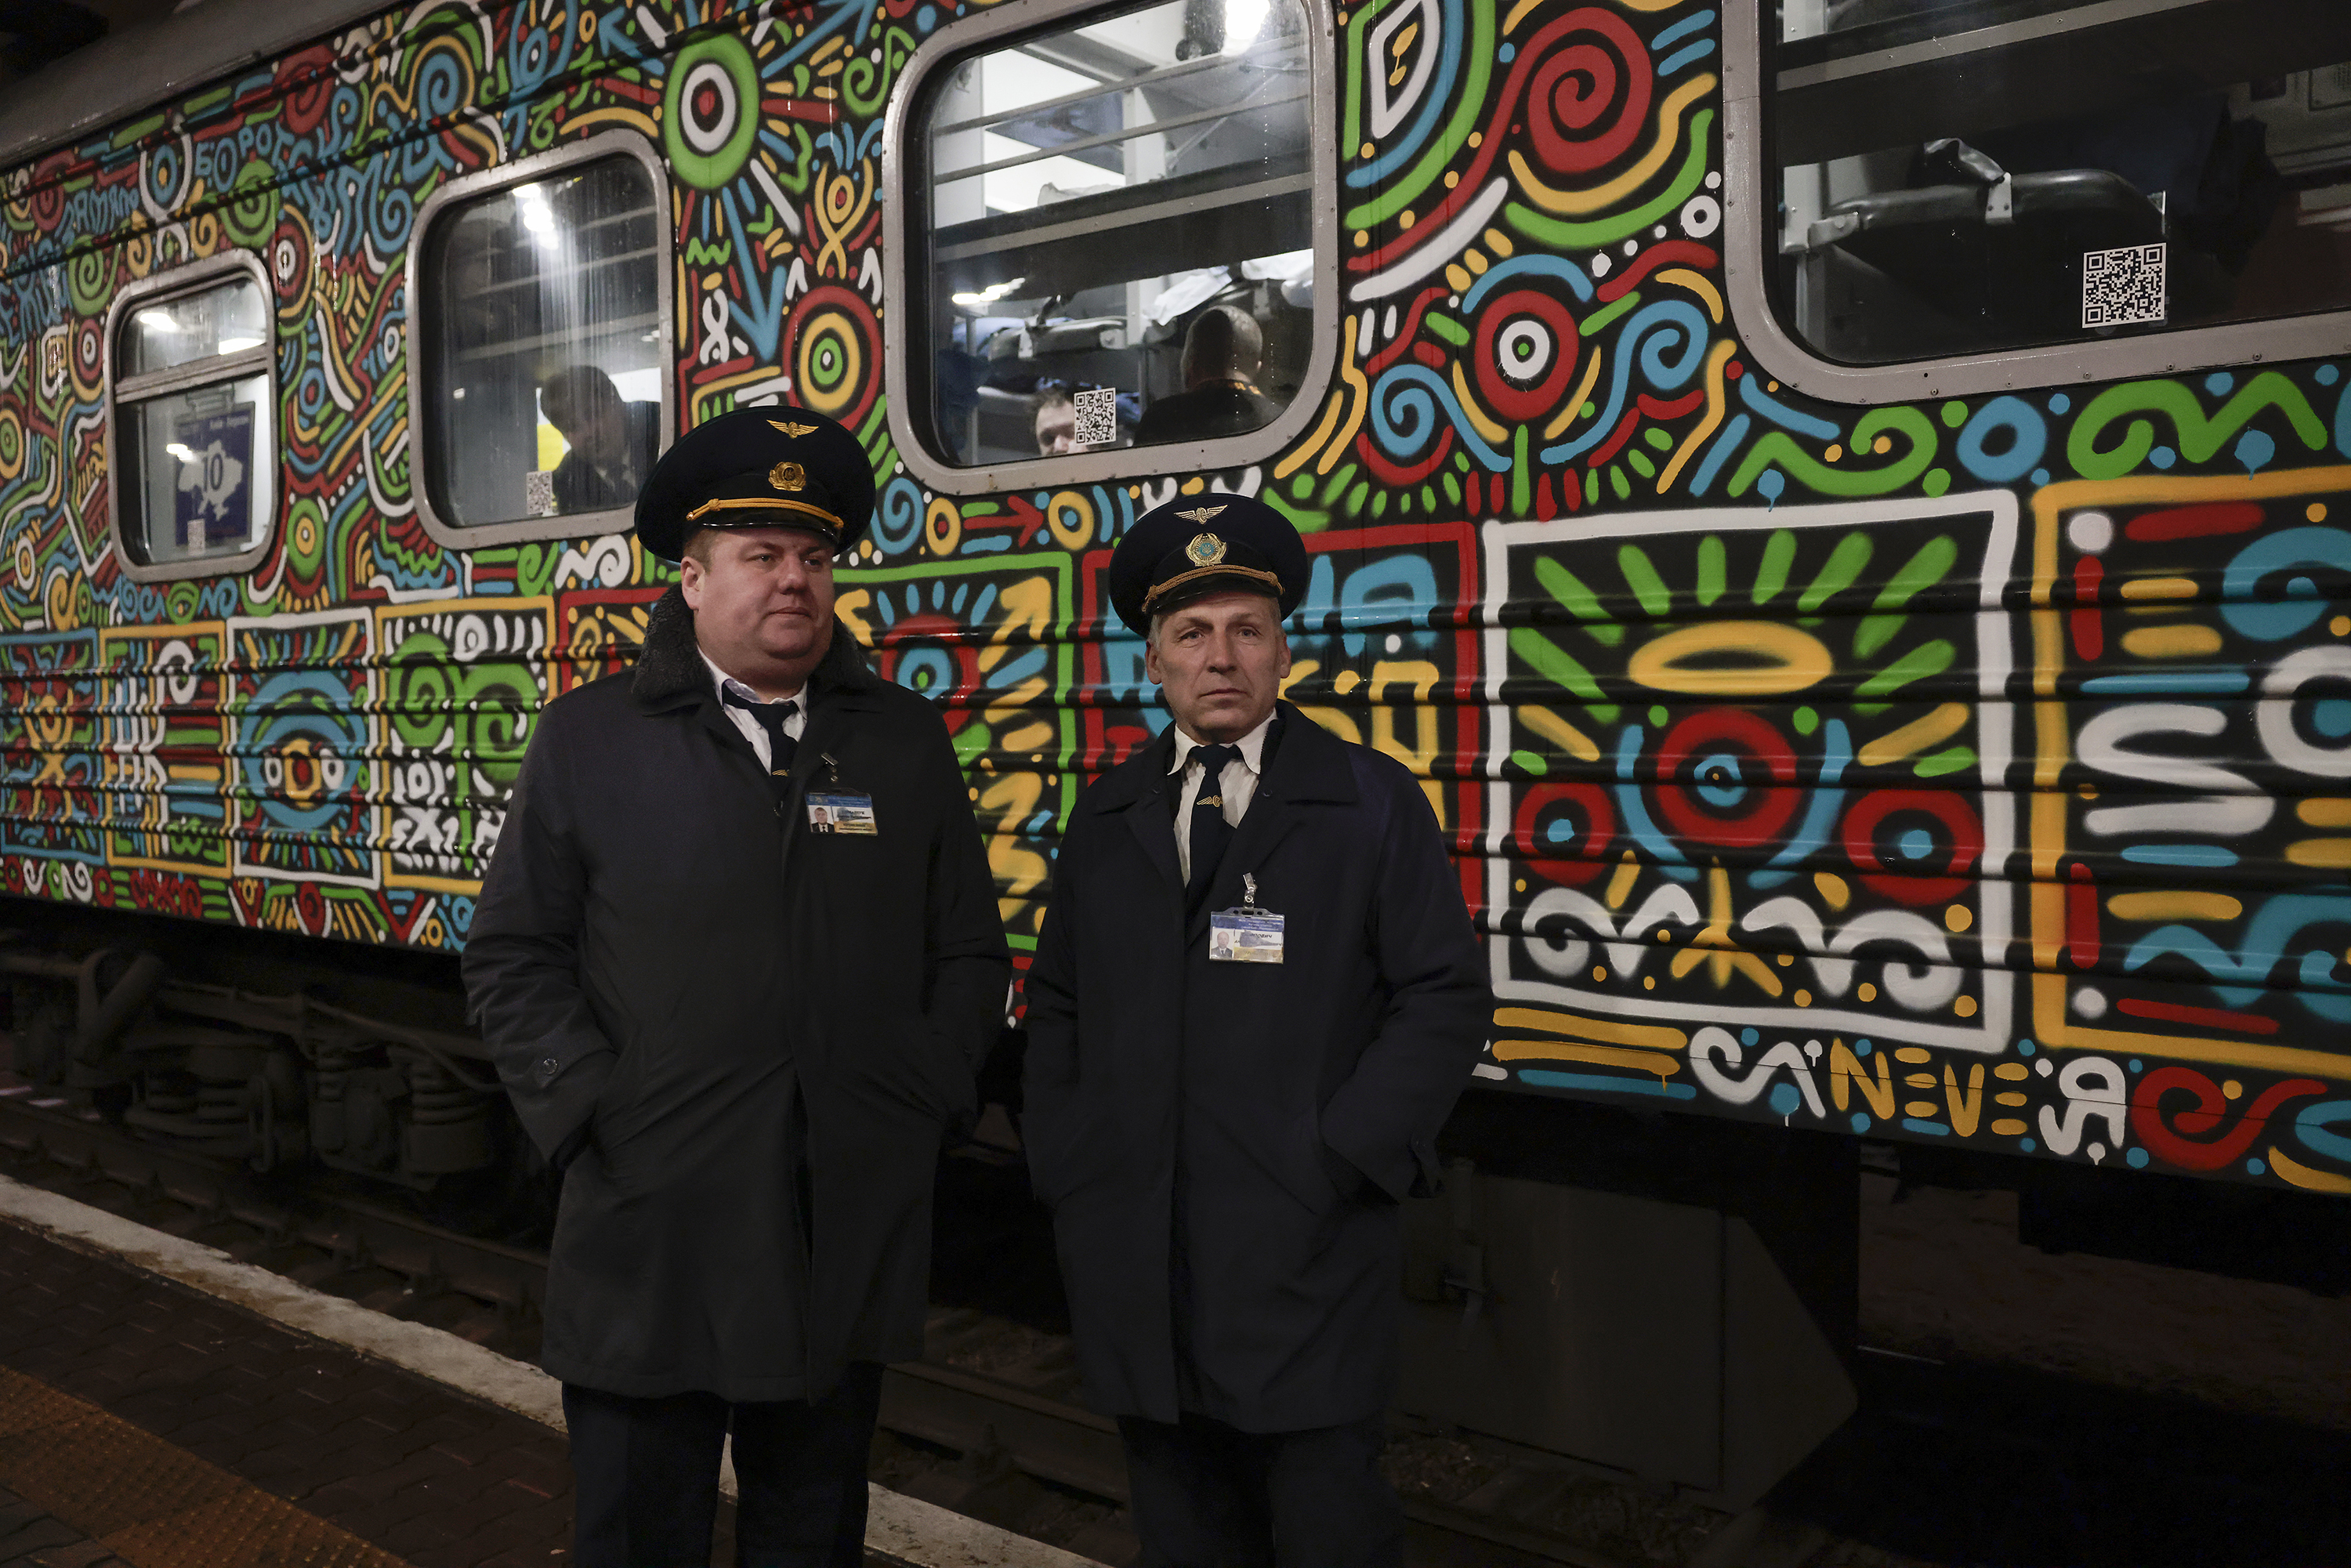 Passengers and staff go aboard the first train departing Kyiv railway station after Ukrainian forces reclaimed the occupied city on November 18, in Kyiv, Ukraine.